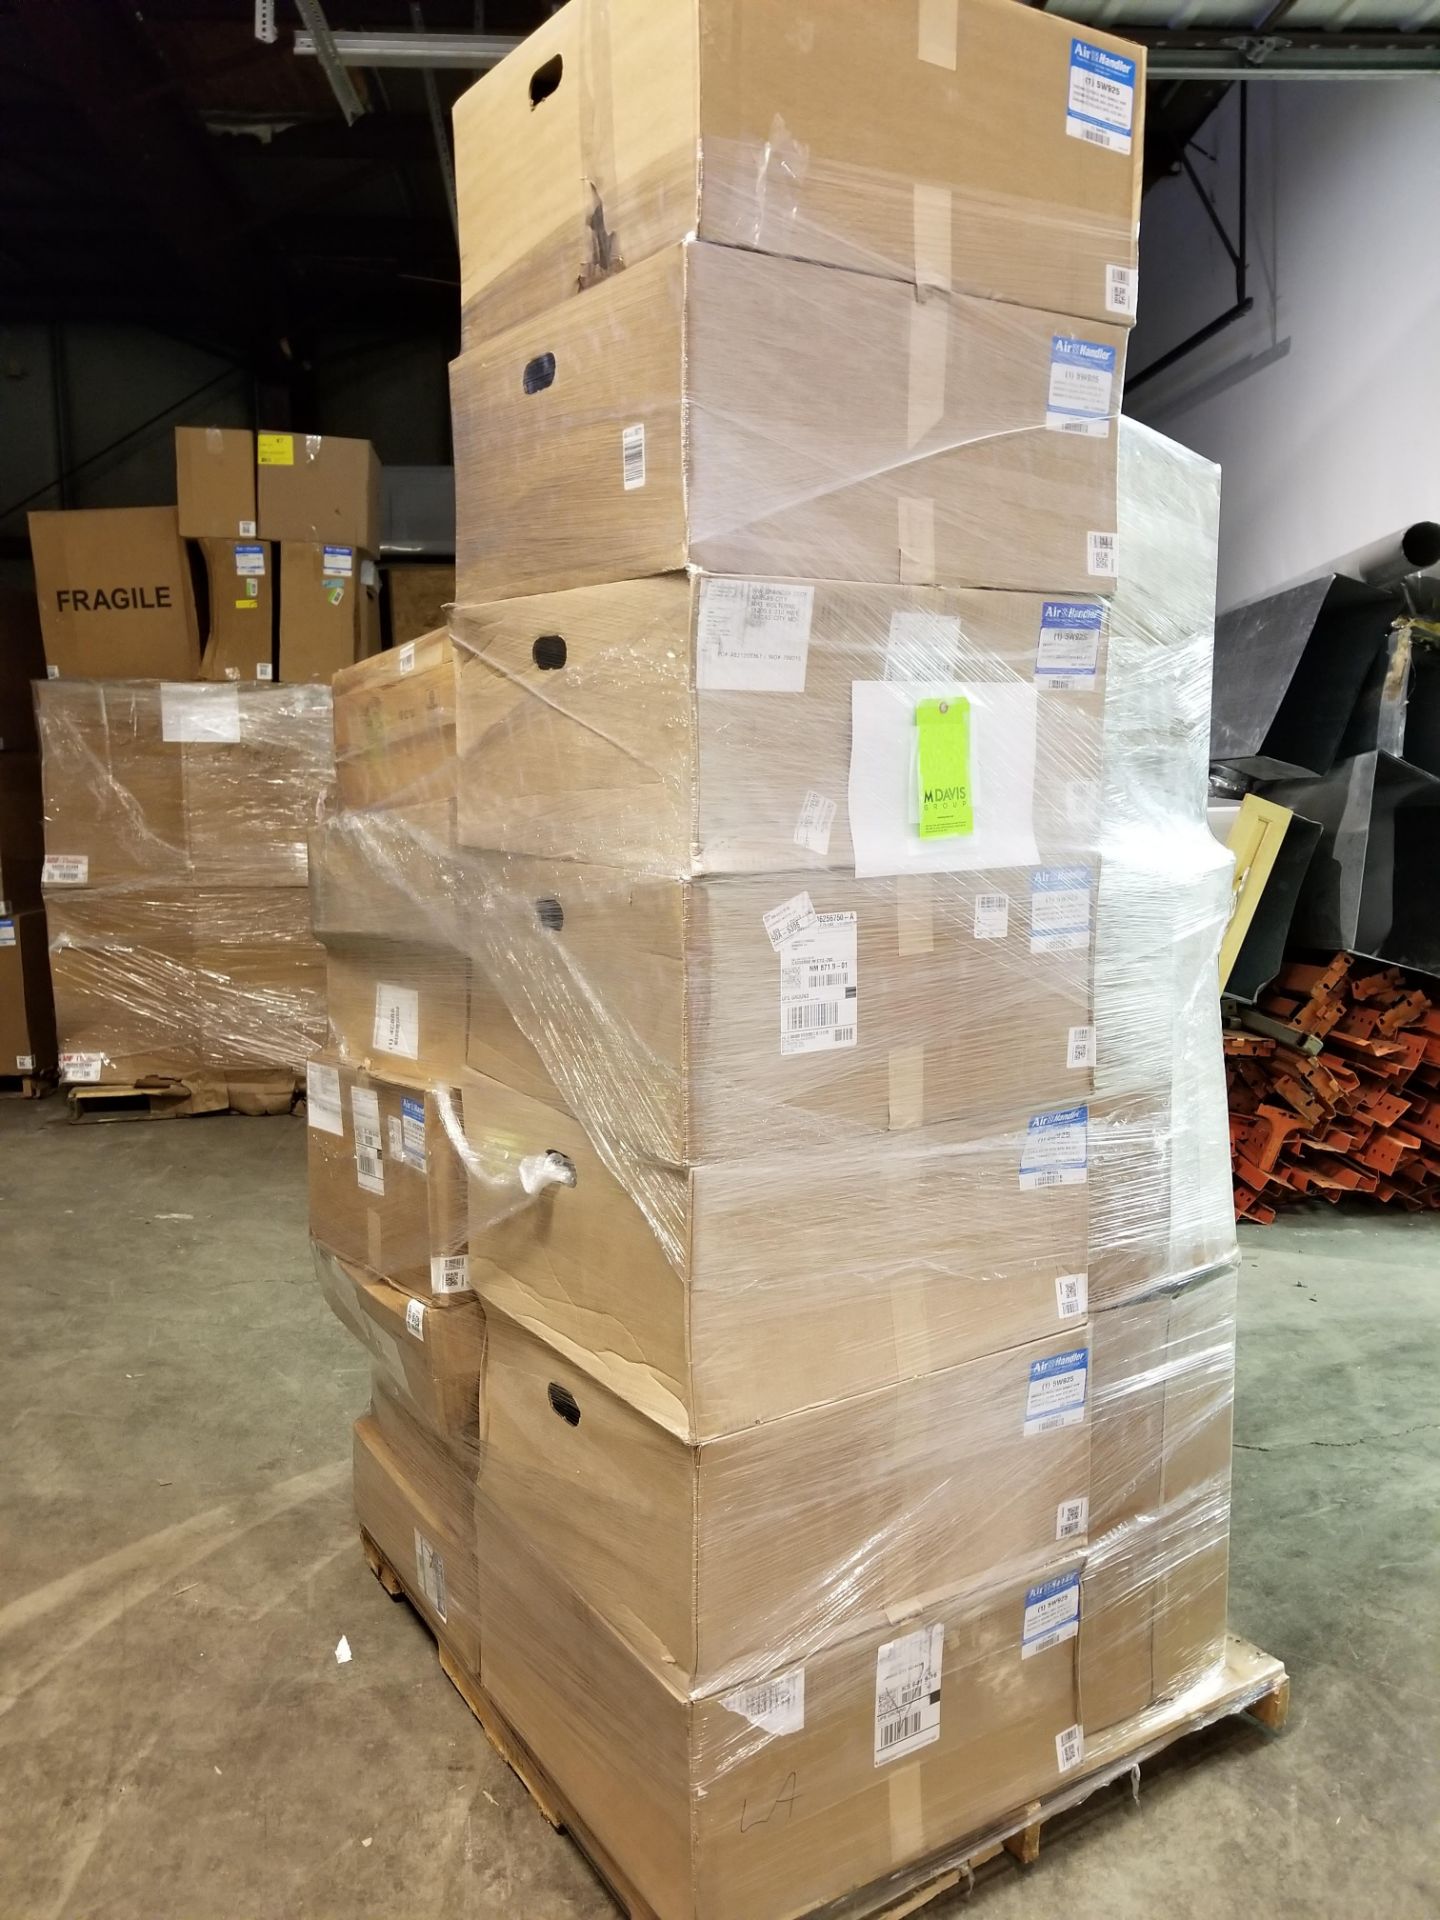 Whole 3 pallets, 137 air filters: New filters. Grainger#: 5E845(2); 5W426(2); 5M317(11); 2GHT1; - Image 2 of 3